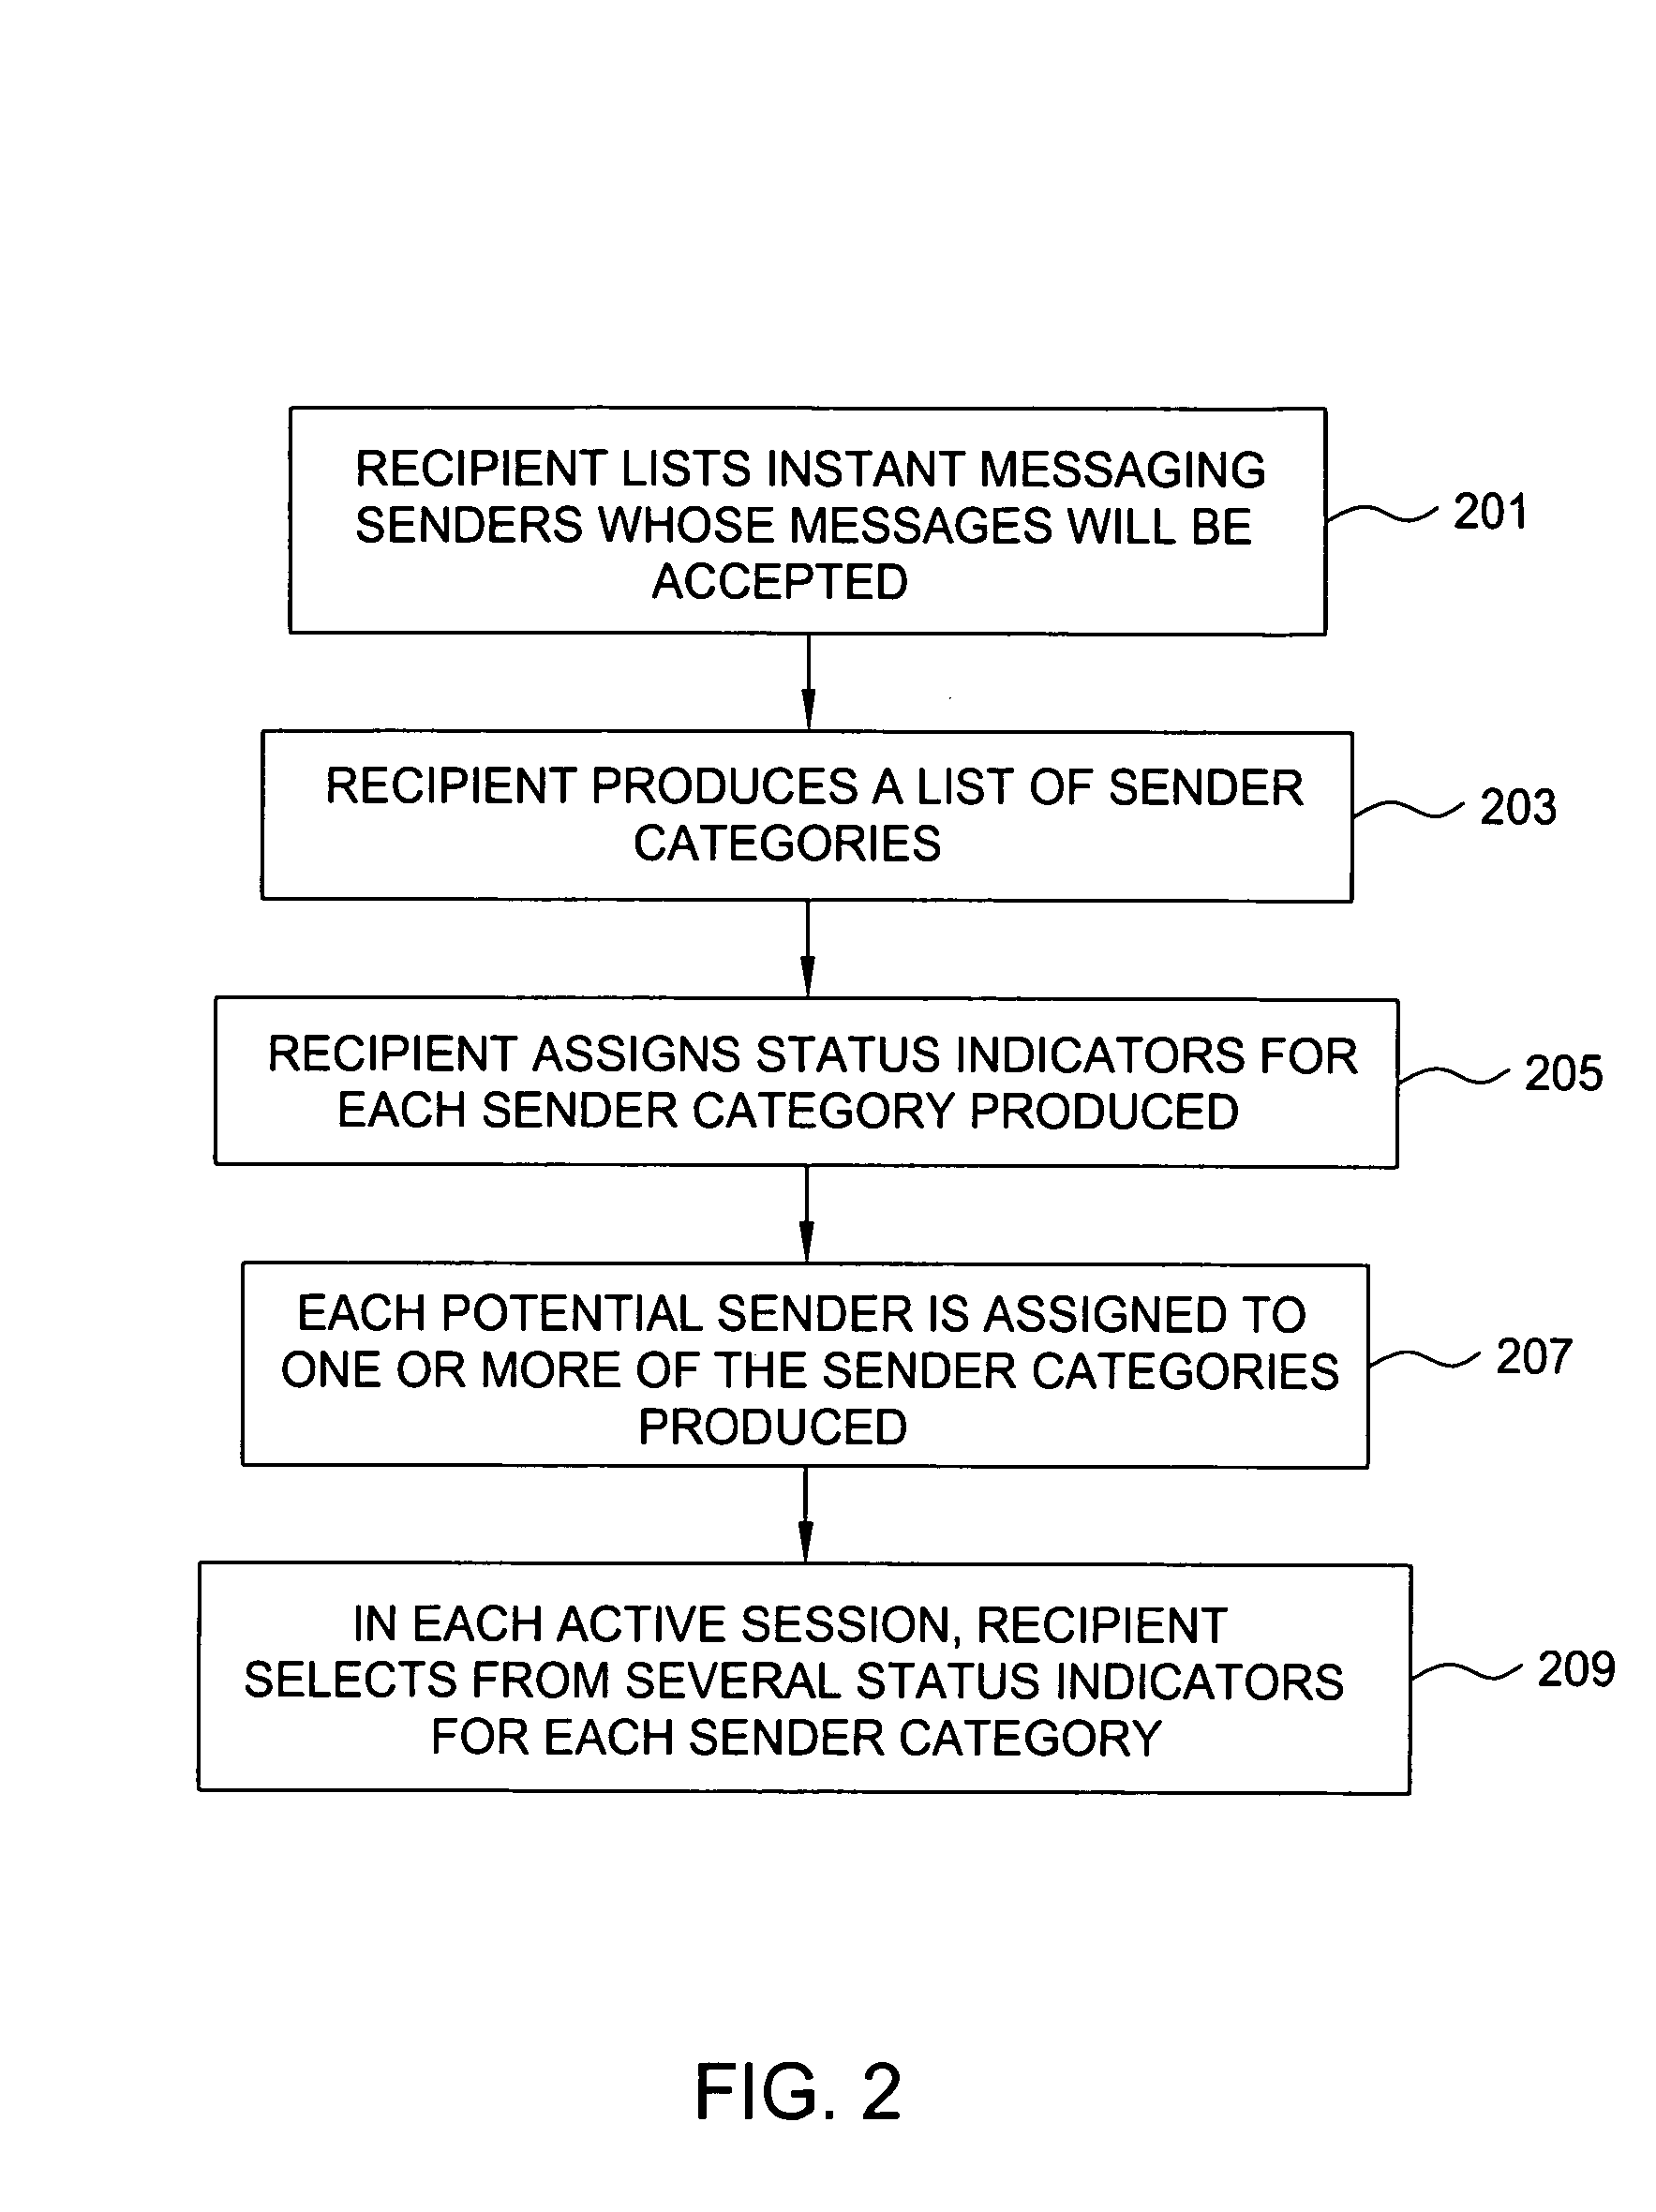 Method of authorizing receipt of instant messages by a recipient user